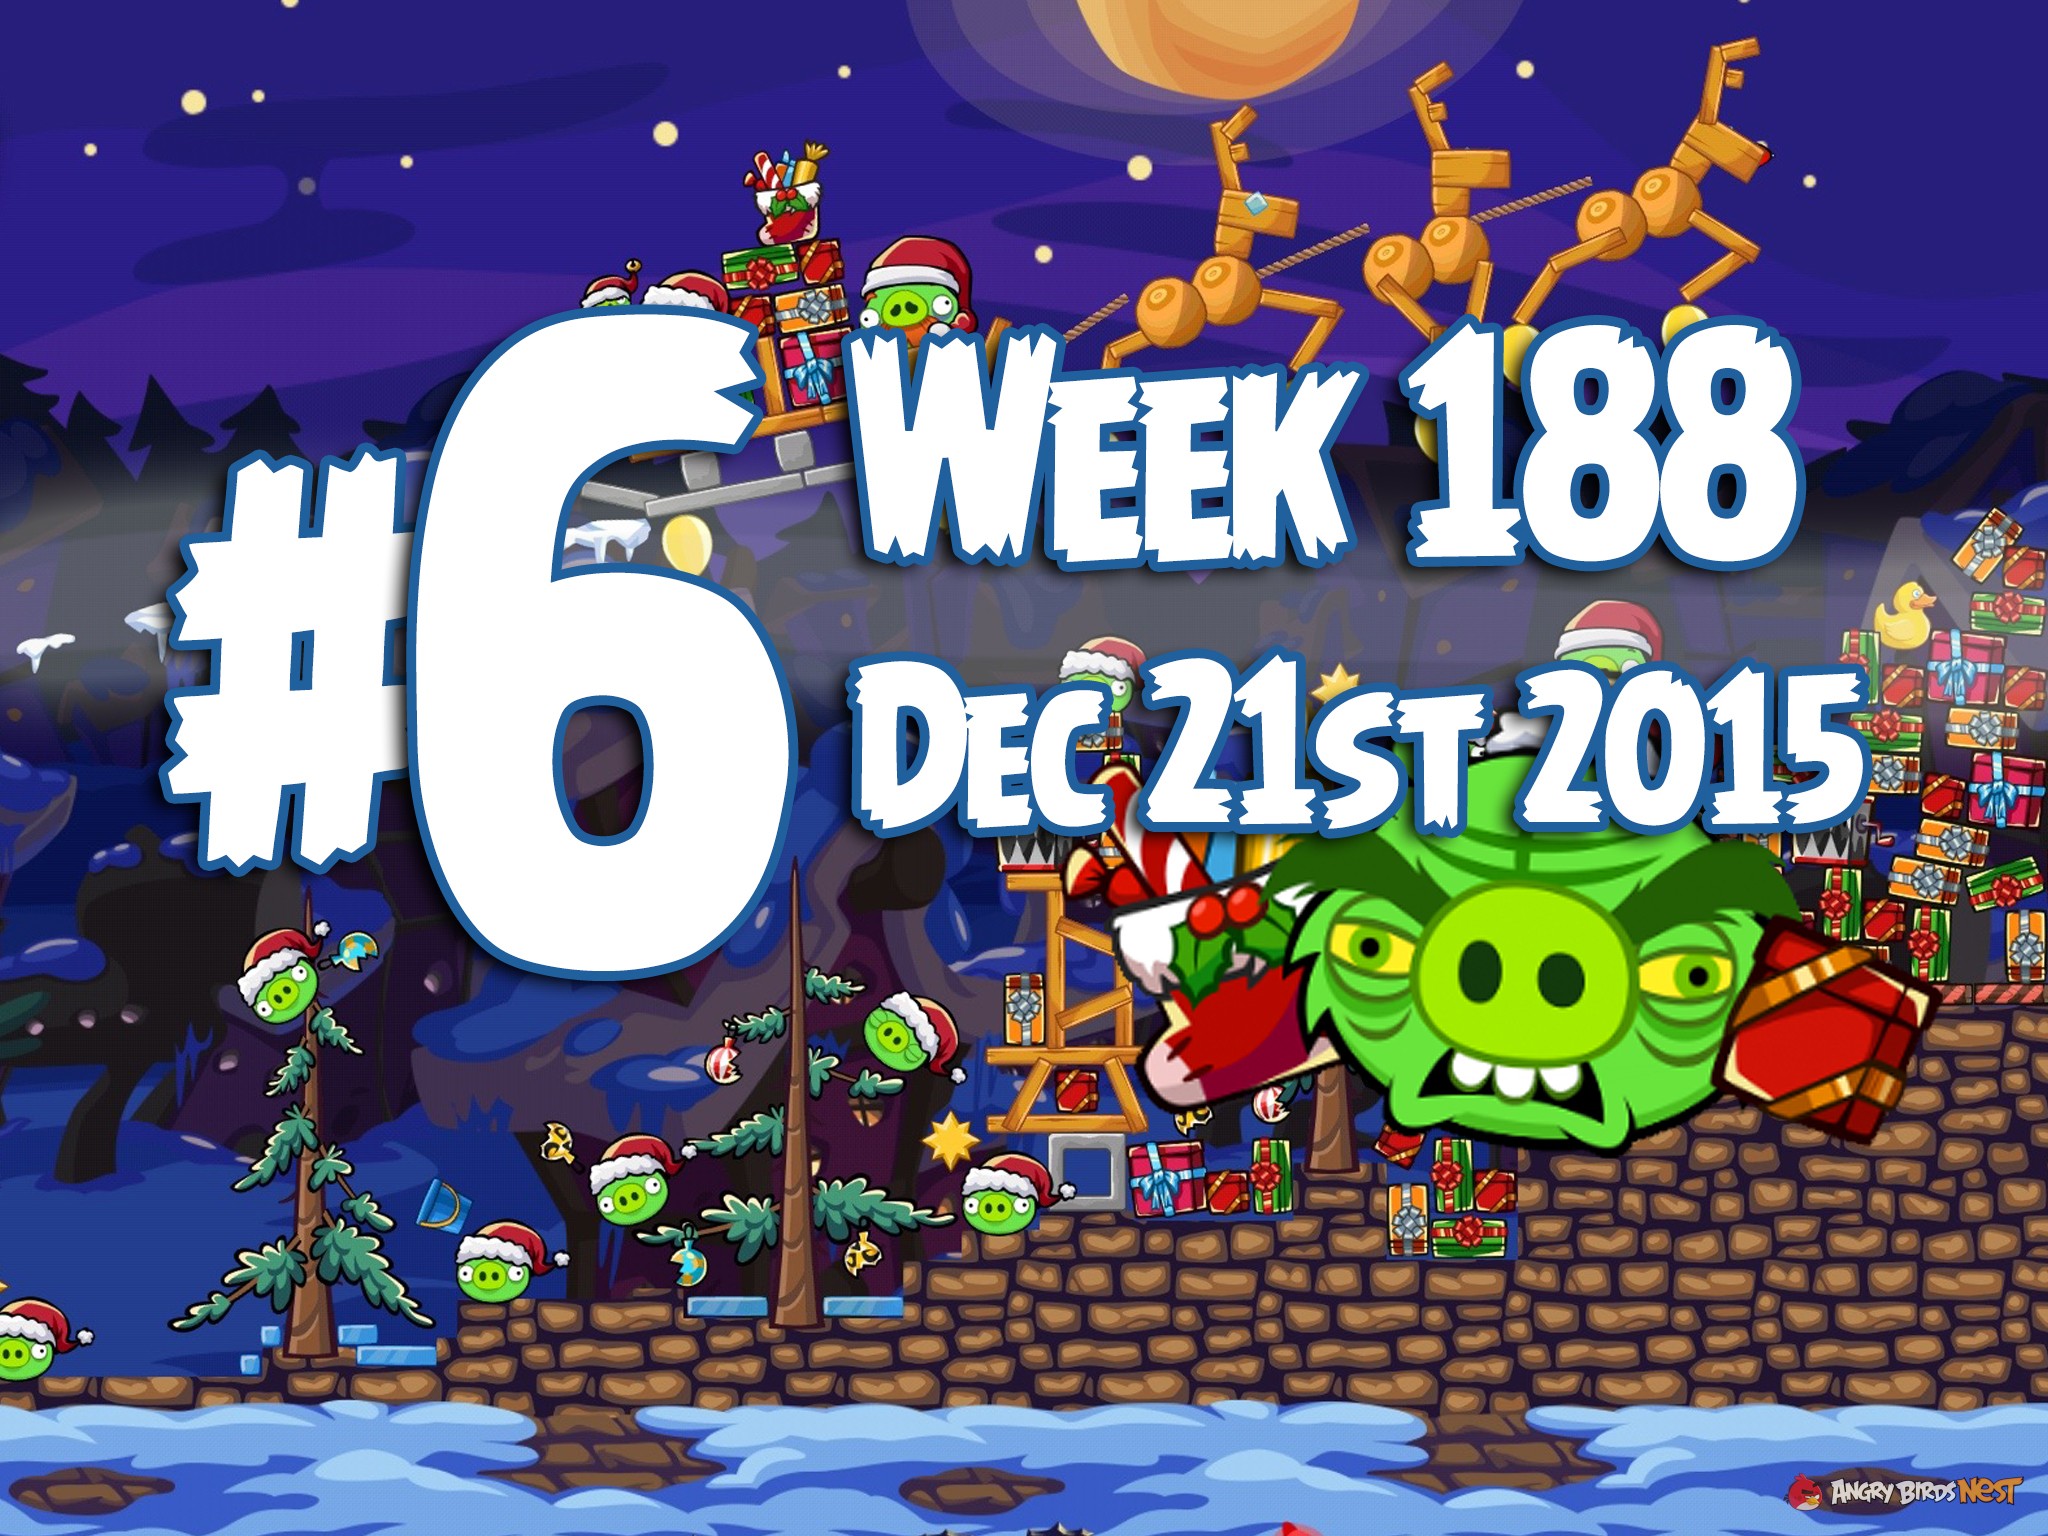 Angry Birds Friends Week 188 Level 6